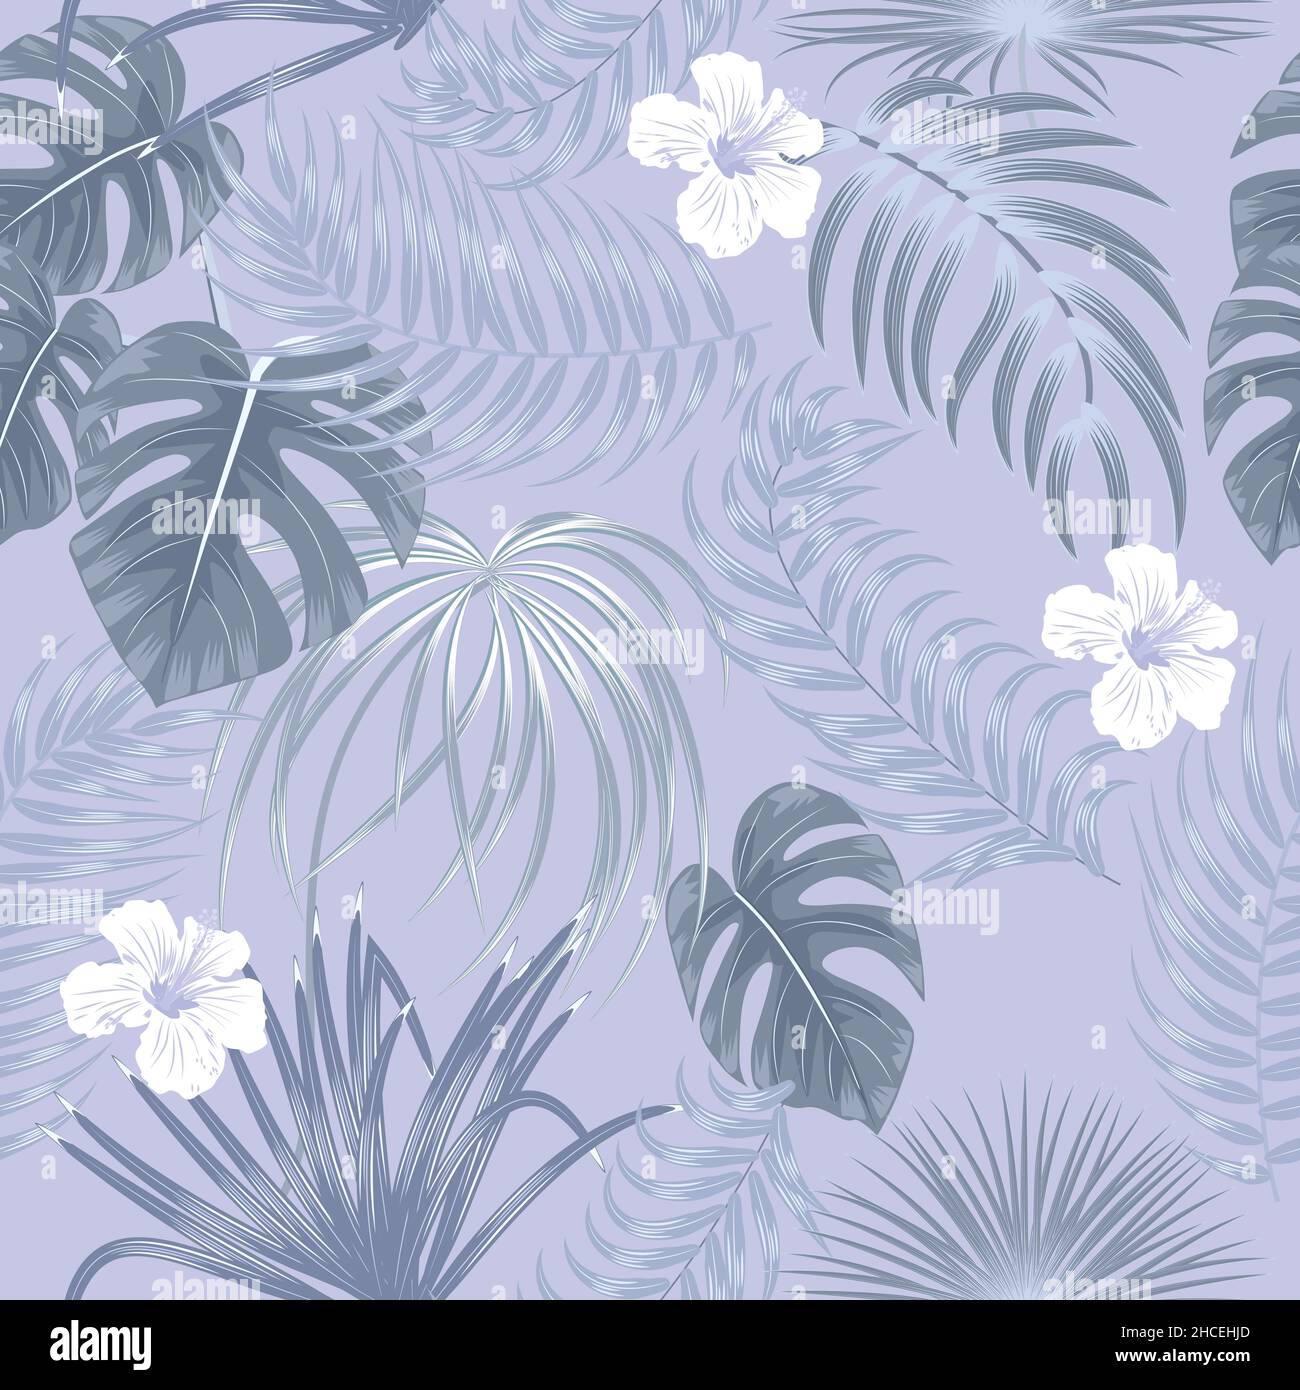 Seamless pattern with silver tropical palm leaves and flowers on white background.  Floral decorative illustration vector, for print design Stock Vector